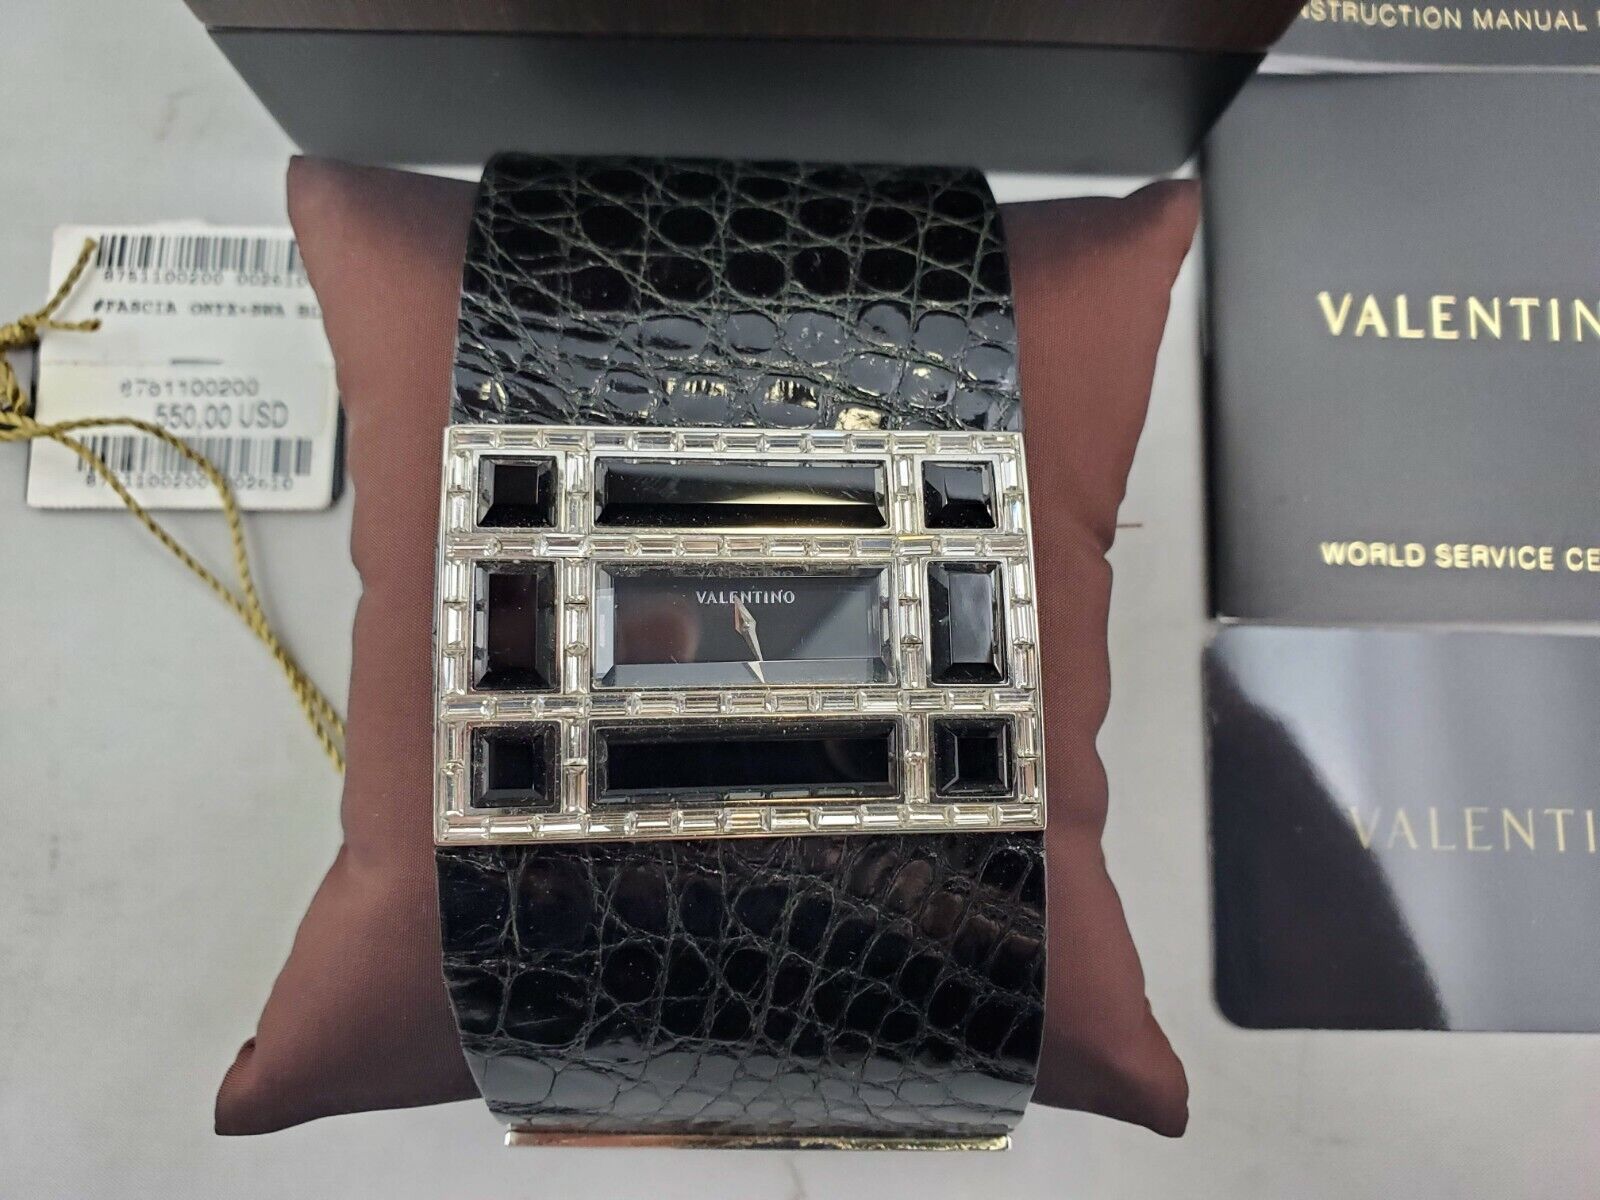 Valentino Italy Black Crocodile Band Cuff Watch in Box with Papers - Never Worn